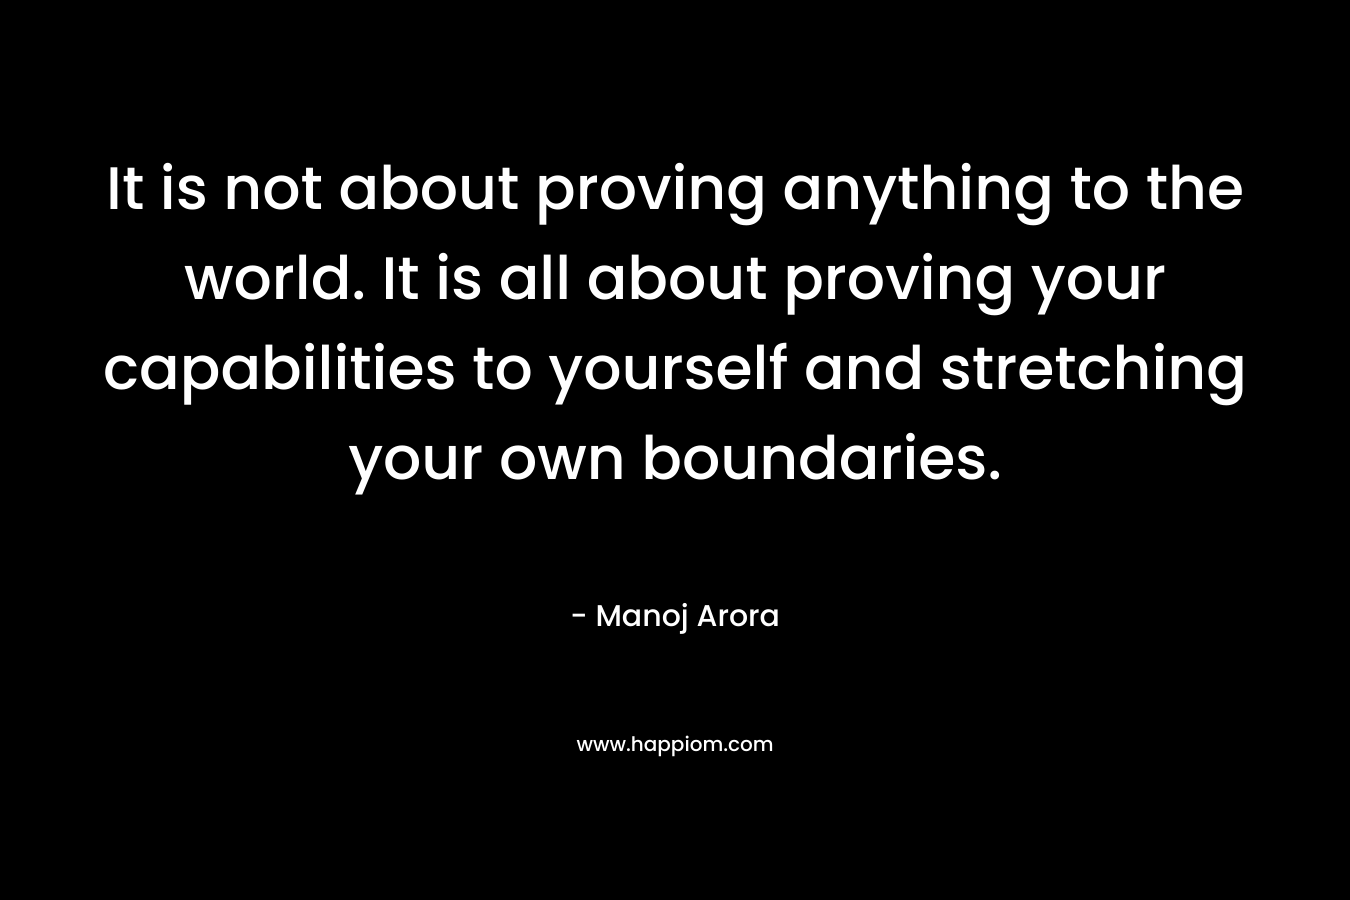 It is not about proving anything to the world. It is all about proving your capabilities to yourself and stretching your own boundaries.